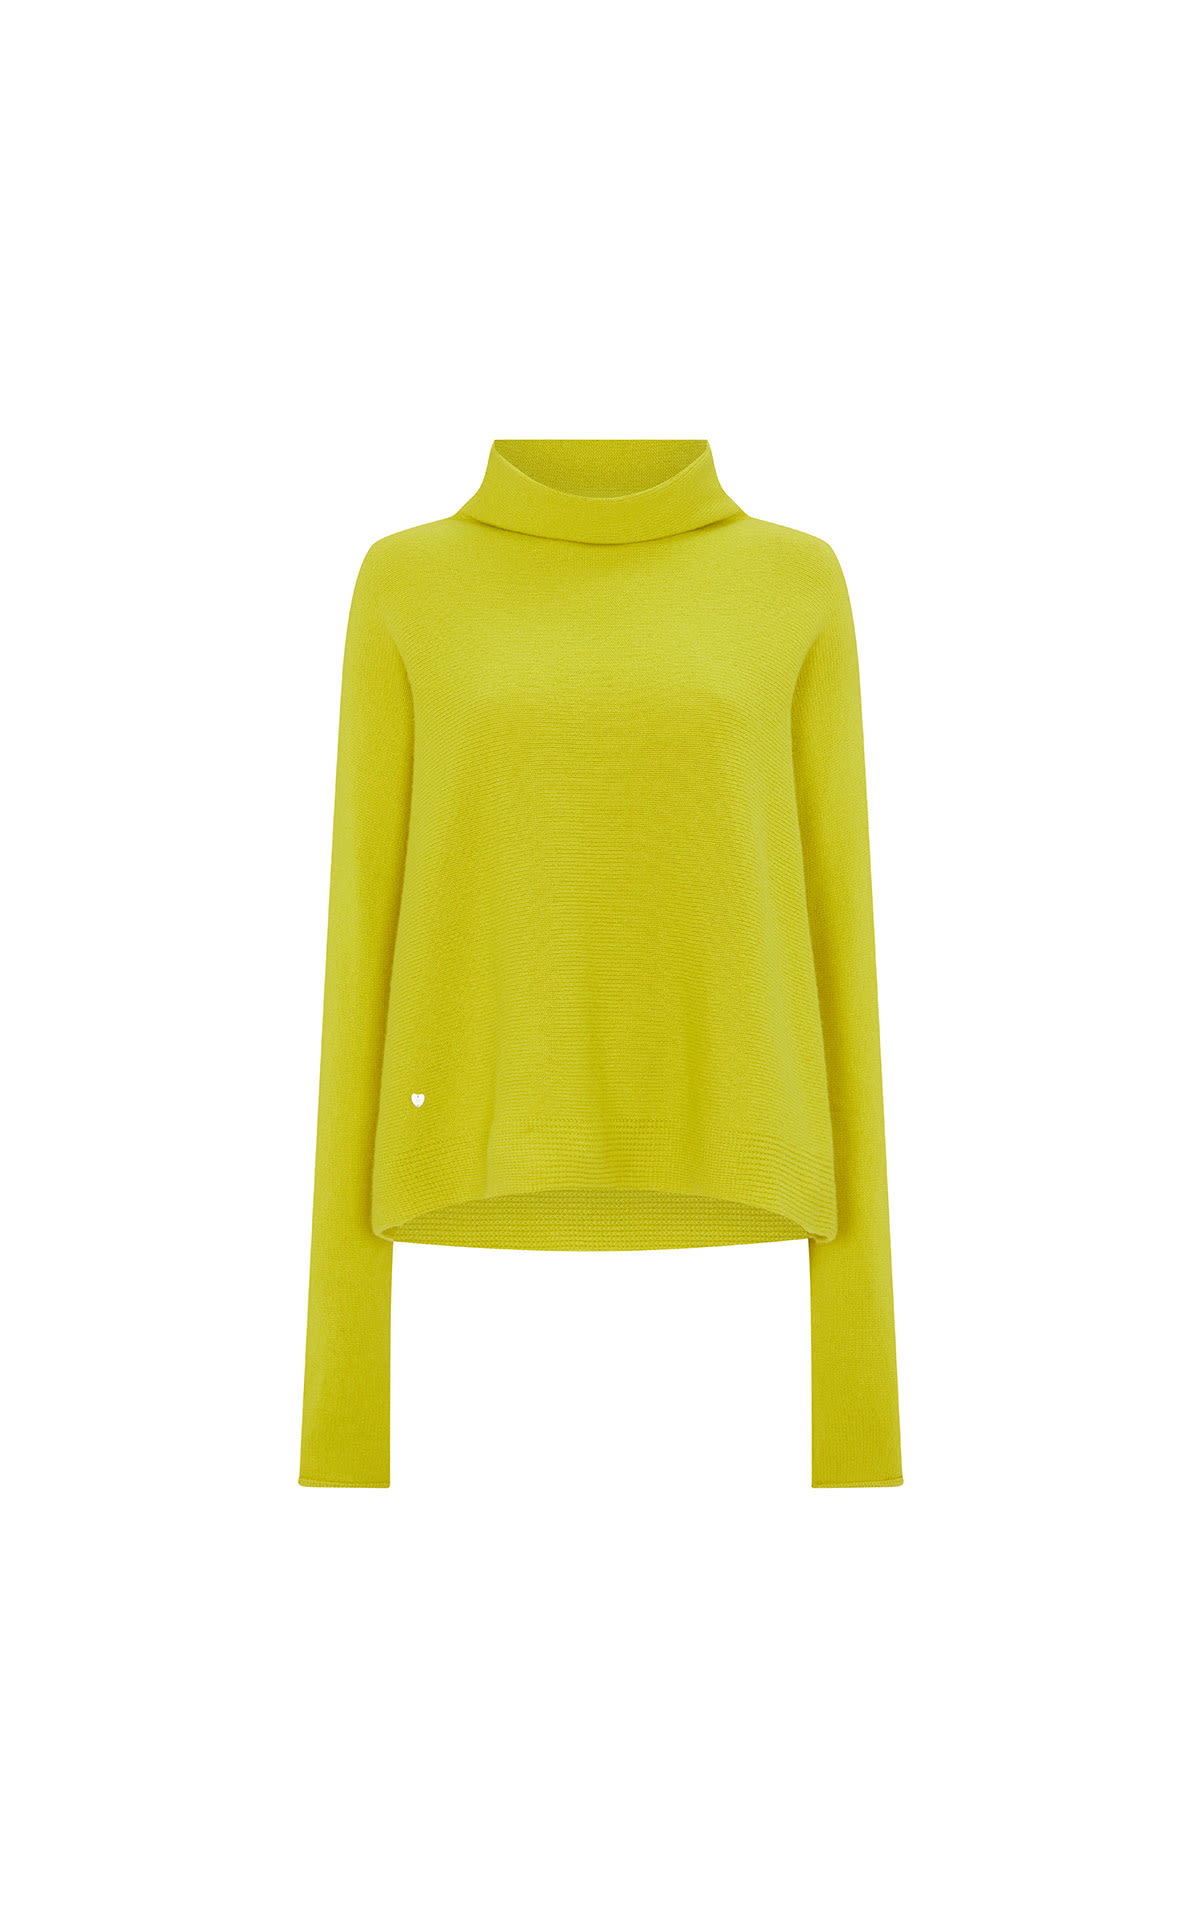 Bamford Retreat sweater pear front from Bicester Village